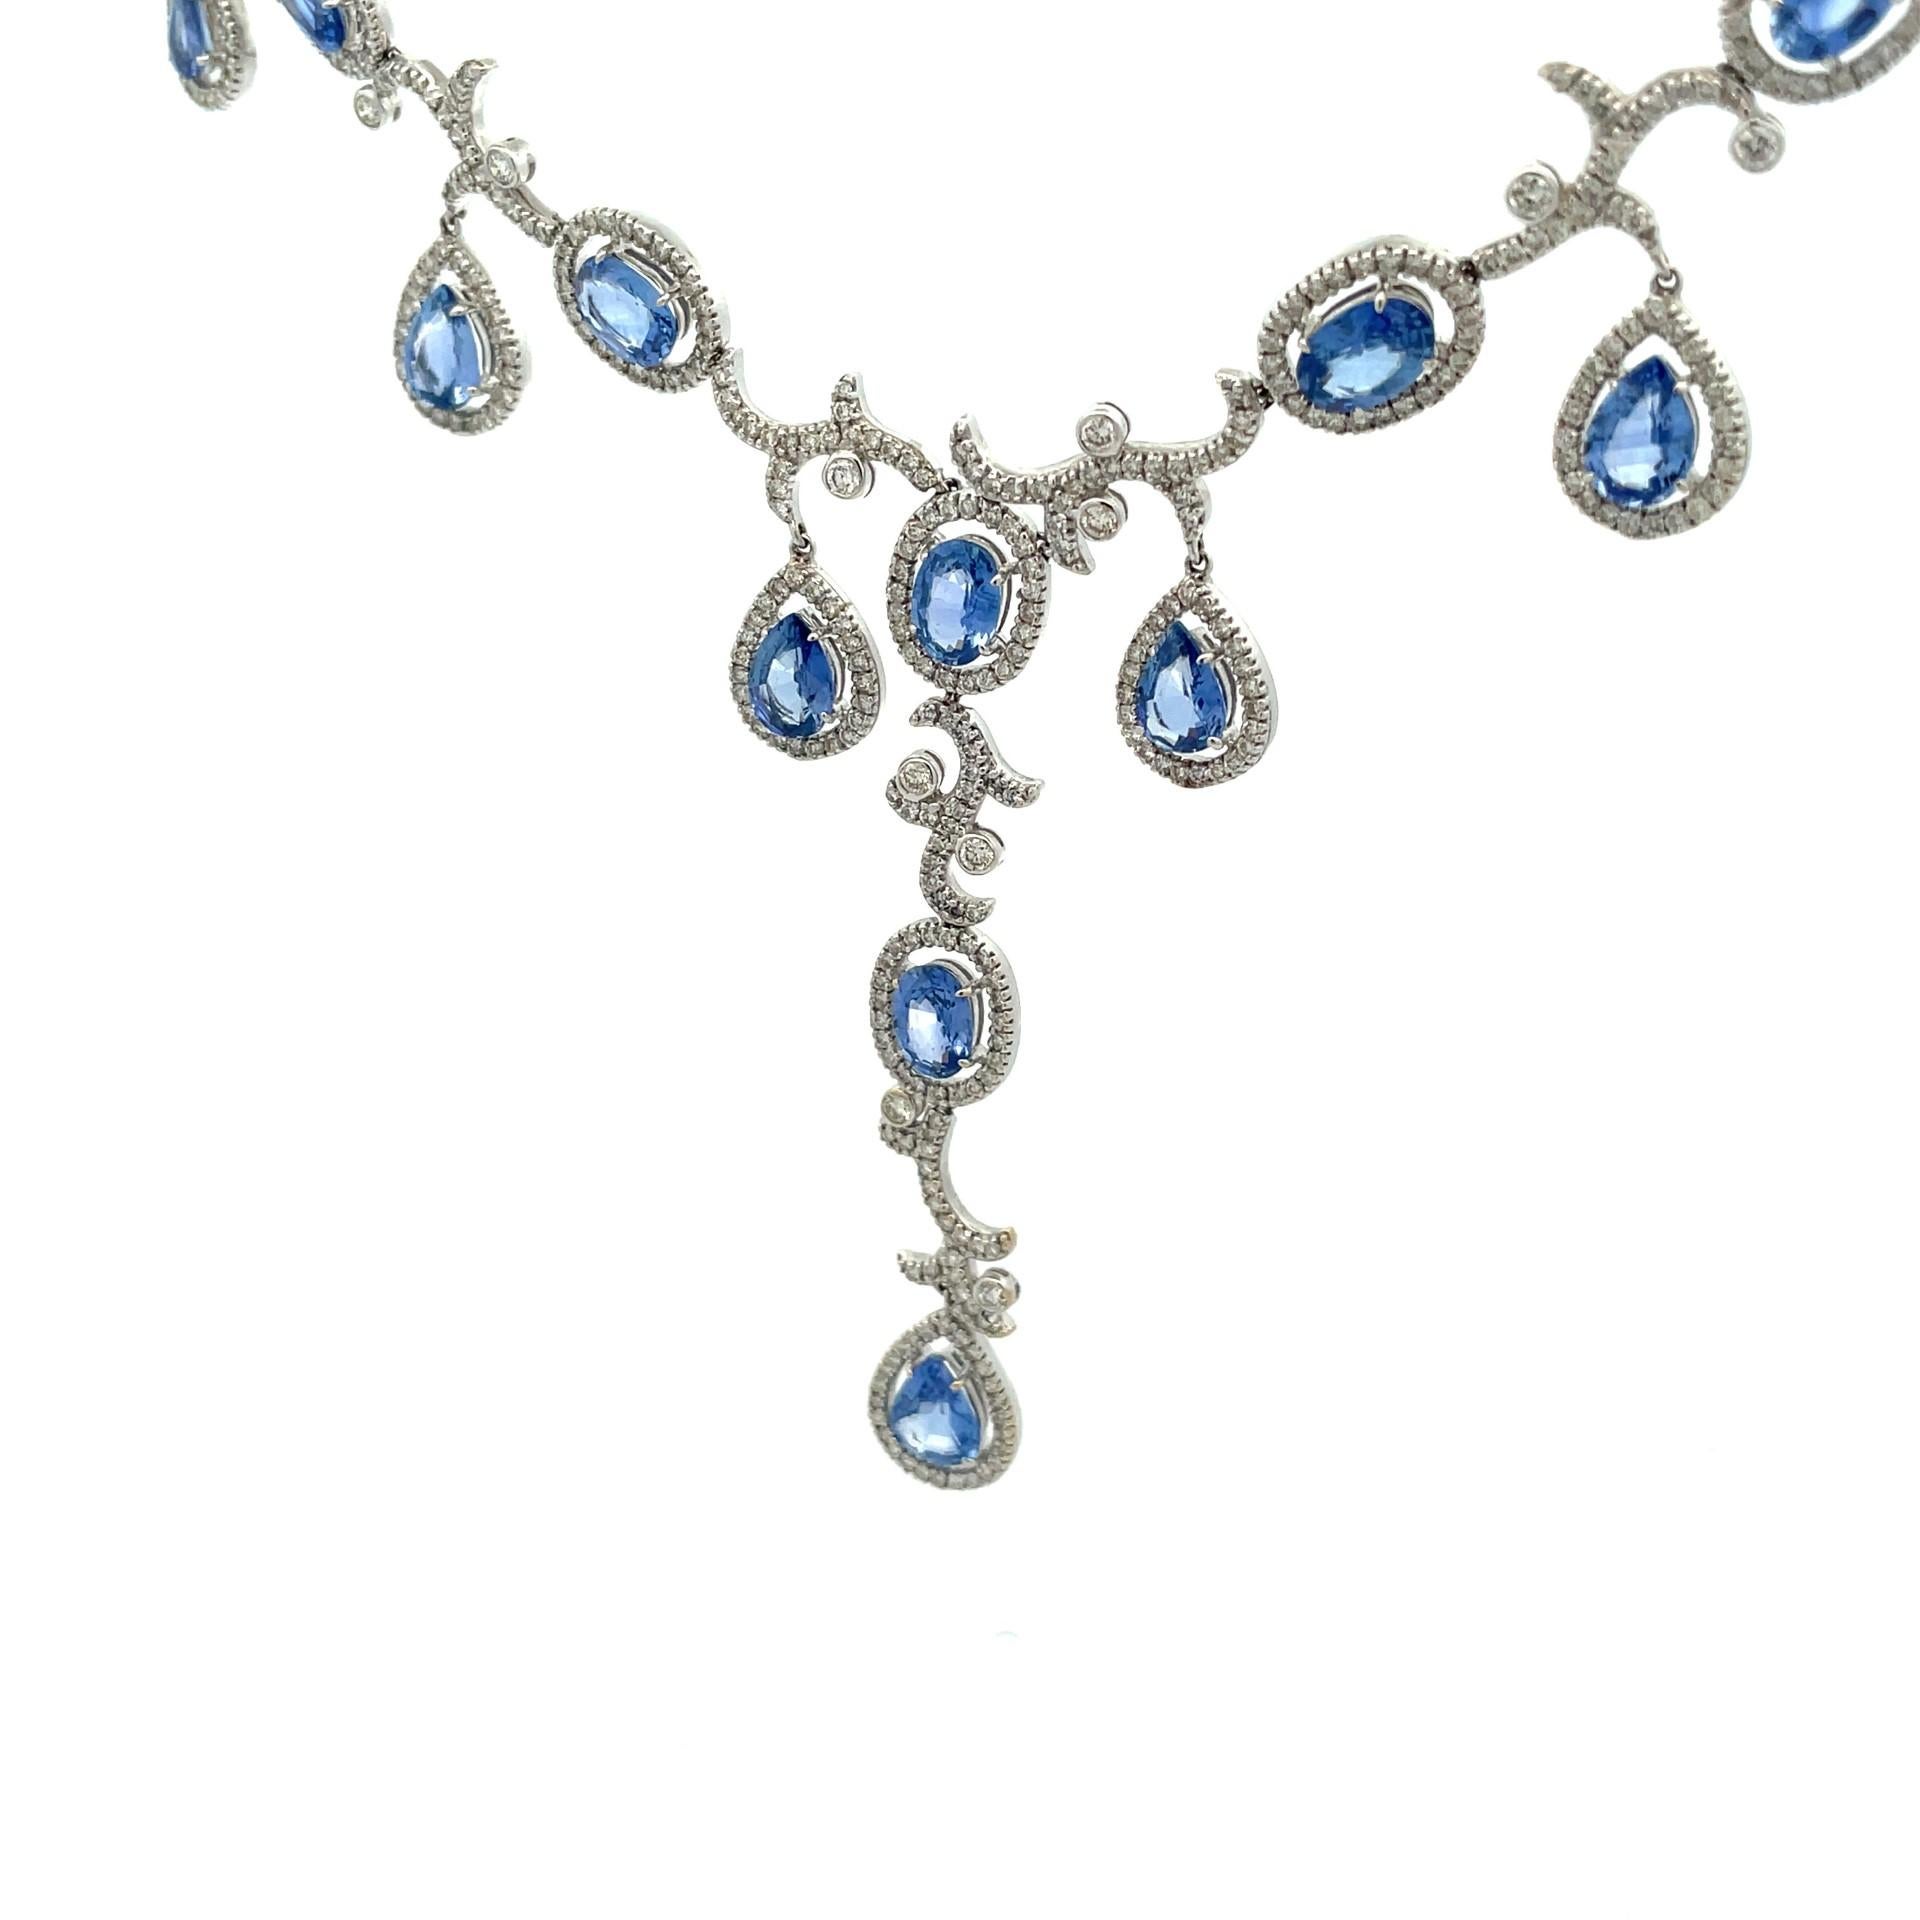 Our sapphire drop necklace in 18kt white gold is designed with a delicate cascade of oval and pear shape natural Ceylon blue sapphires and pave diamond halo set to frame for an elegant evening look.

844 brilliant cut natural white diamonds 5.94ct